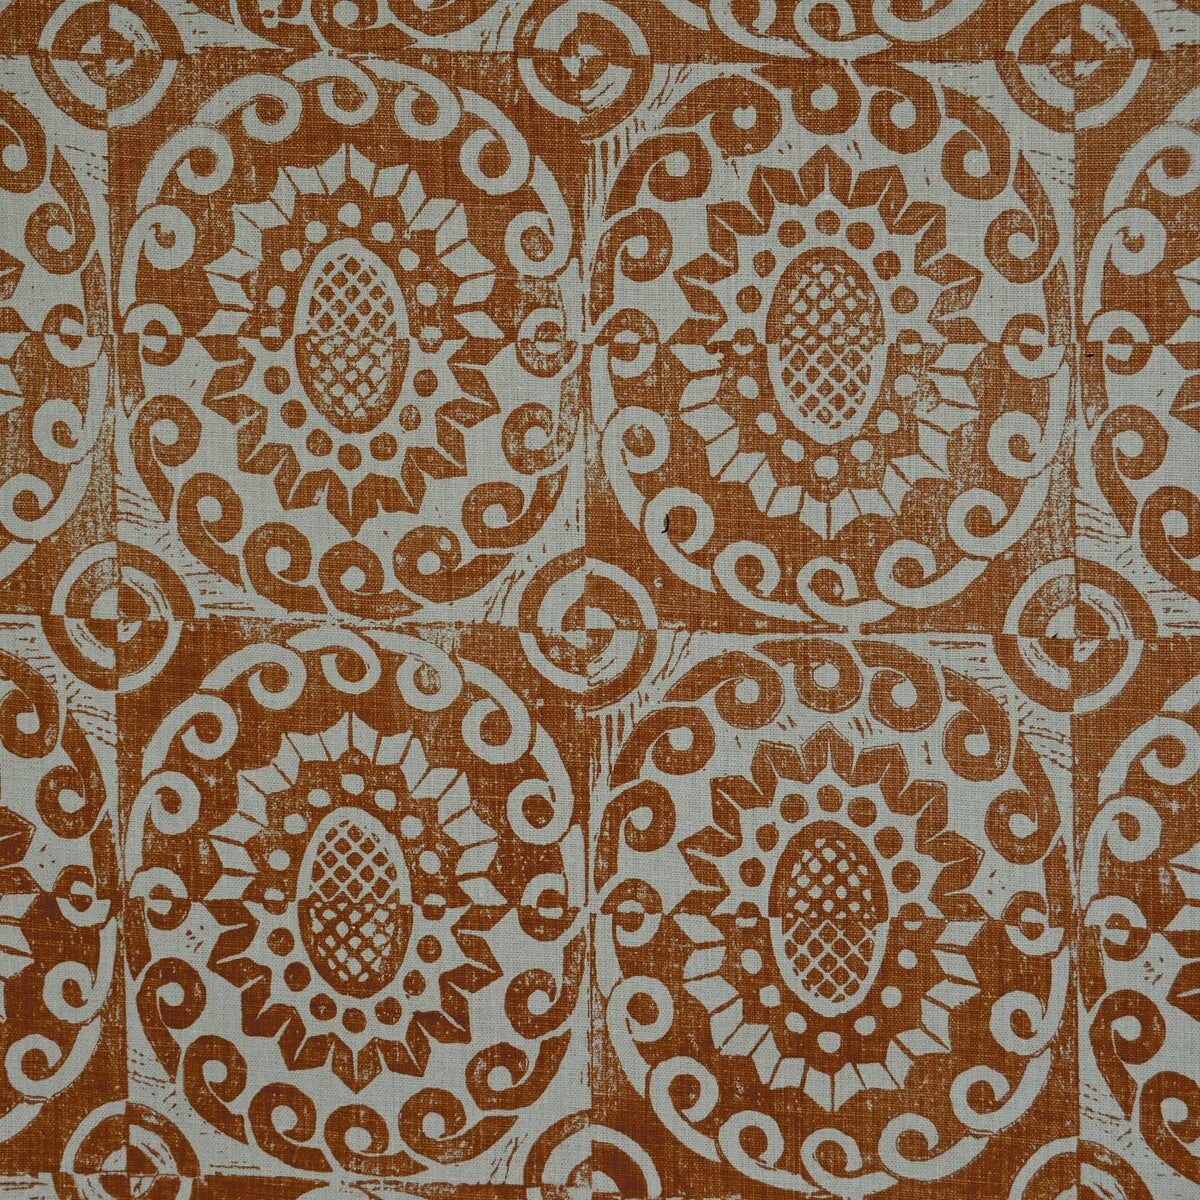 Pineapple On Rustic fabric in pumpkin color - pattern BFC-3629.12.0 - by Lee Jofa in the Blithfield collection